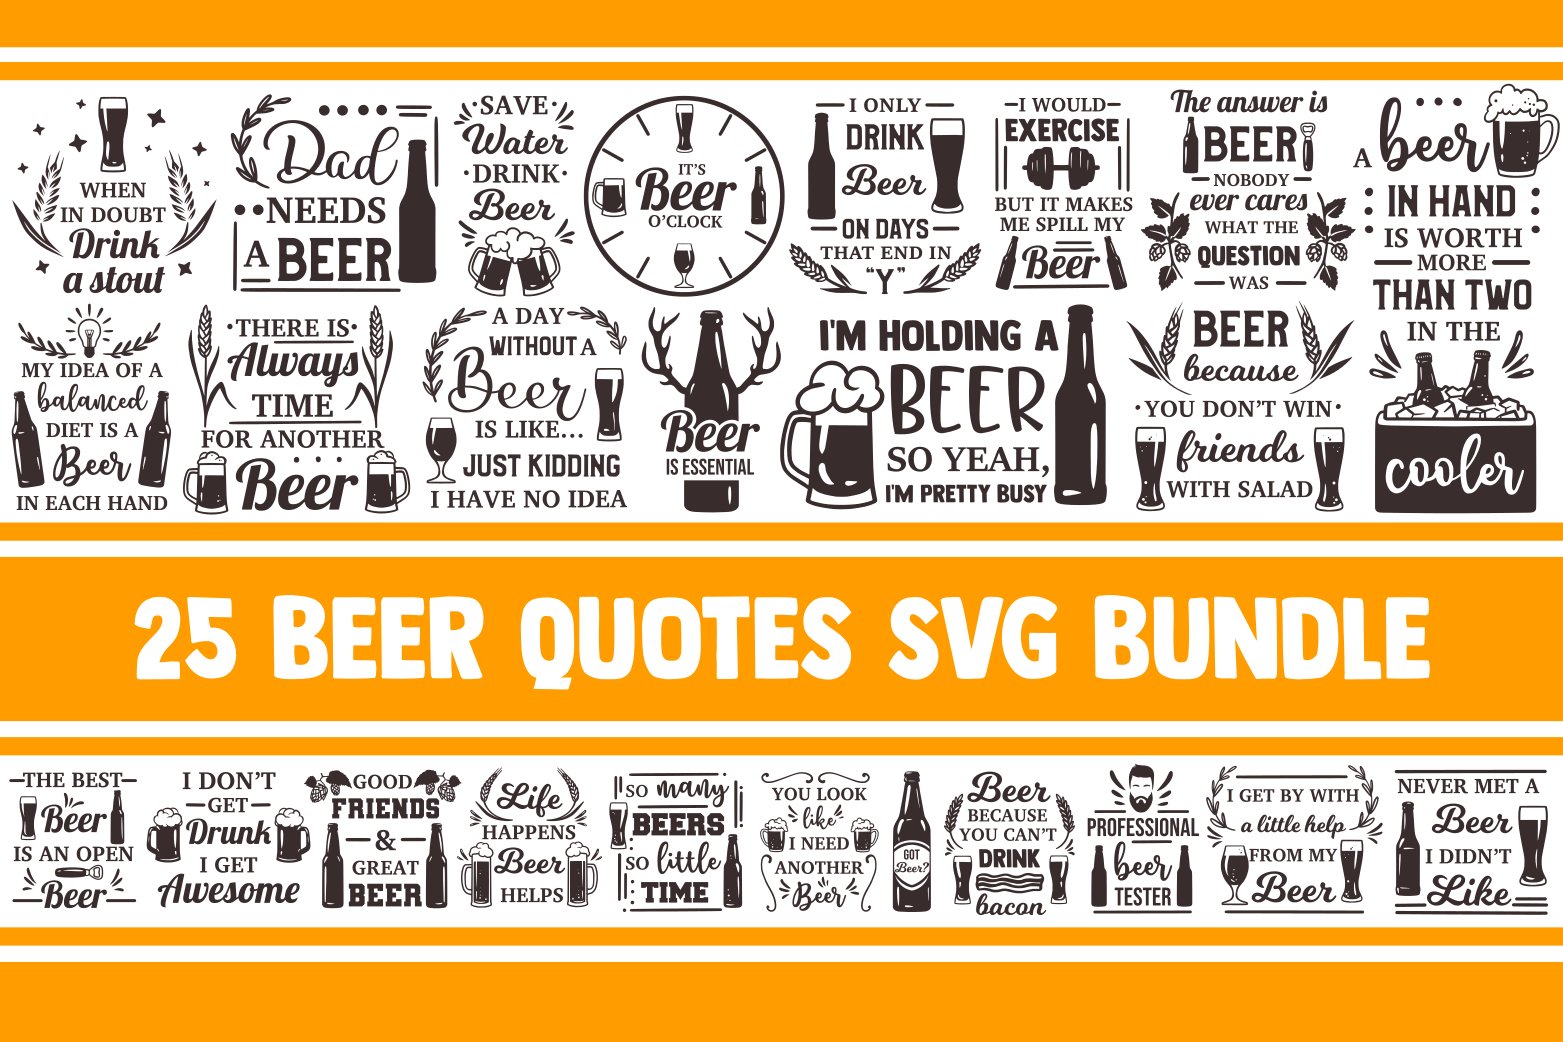 Beer quotes for your project.